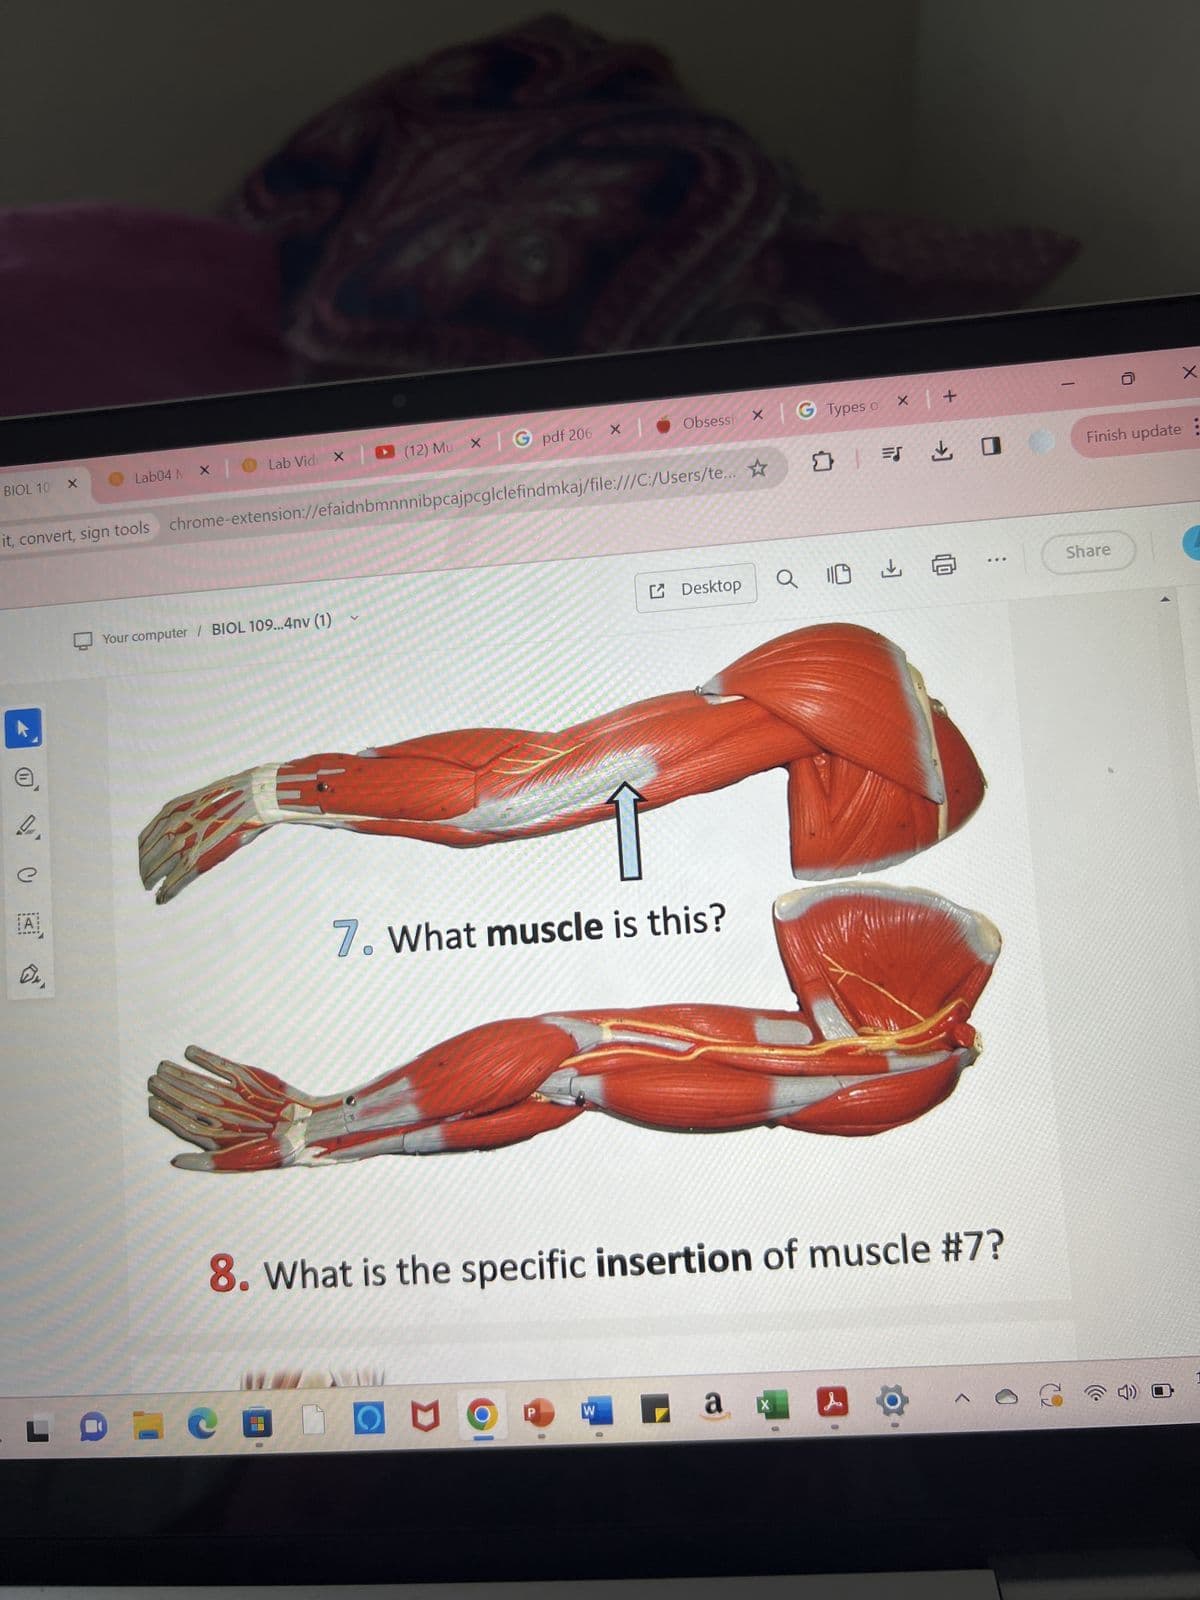 BIOL 10 X
0.
lit, convert, sign tools chrome-extension://efaidnbmnnnibpcajpcglclefind mkaj/file:///C:/Users/te...
e
A
ONA
Lab04 NX Lab Vido X
L
Your computer / BIOL 109... 4nv (1)
(12) Mu X | G pdf 206 X
V
LCD
Obsessi | G Types o x | +
□
7. What muscle is this?
CON
Desktop
W
8. What is the specific insertion of muscle #7?
на
= 0
O
X
110 1 6
^
-
S
X
Finish update:
Share